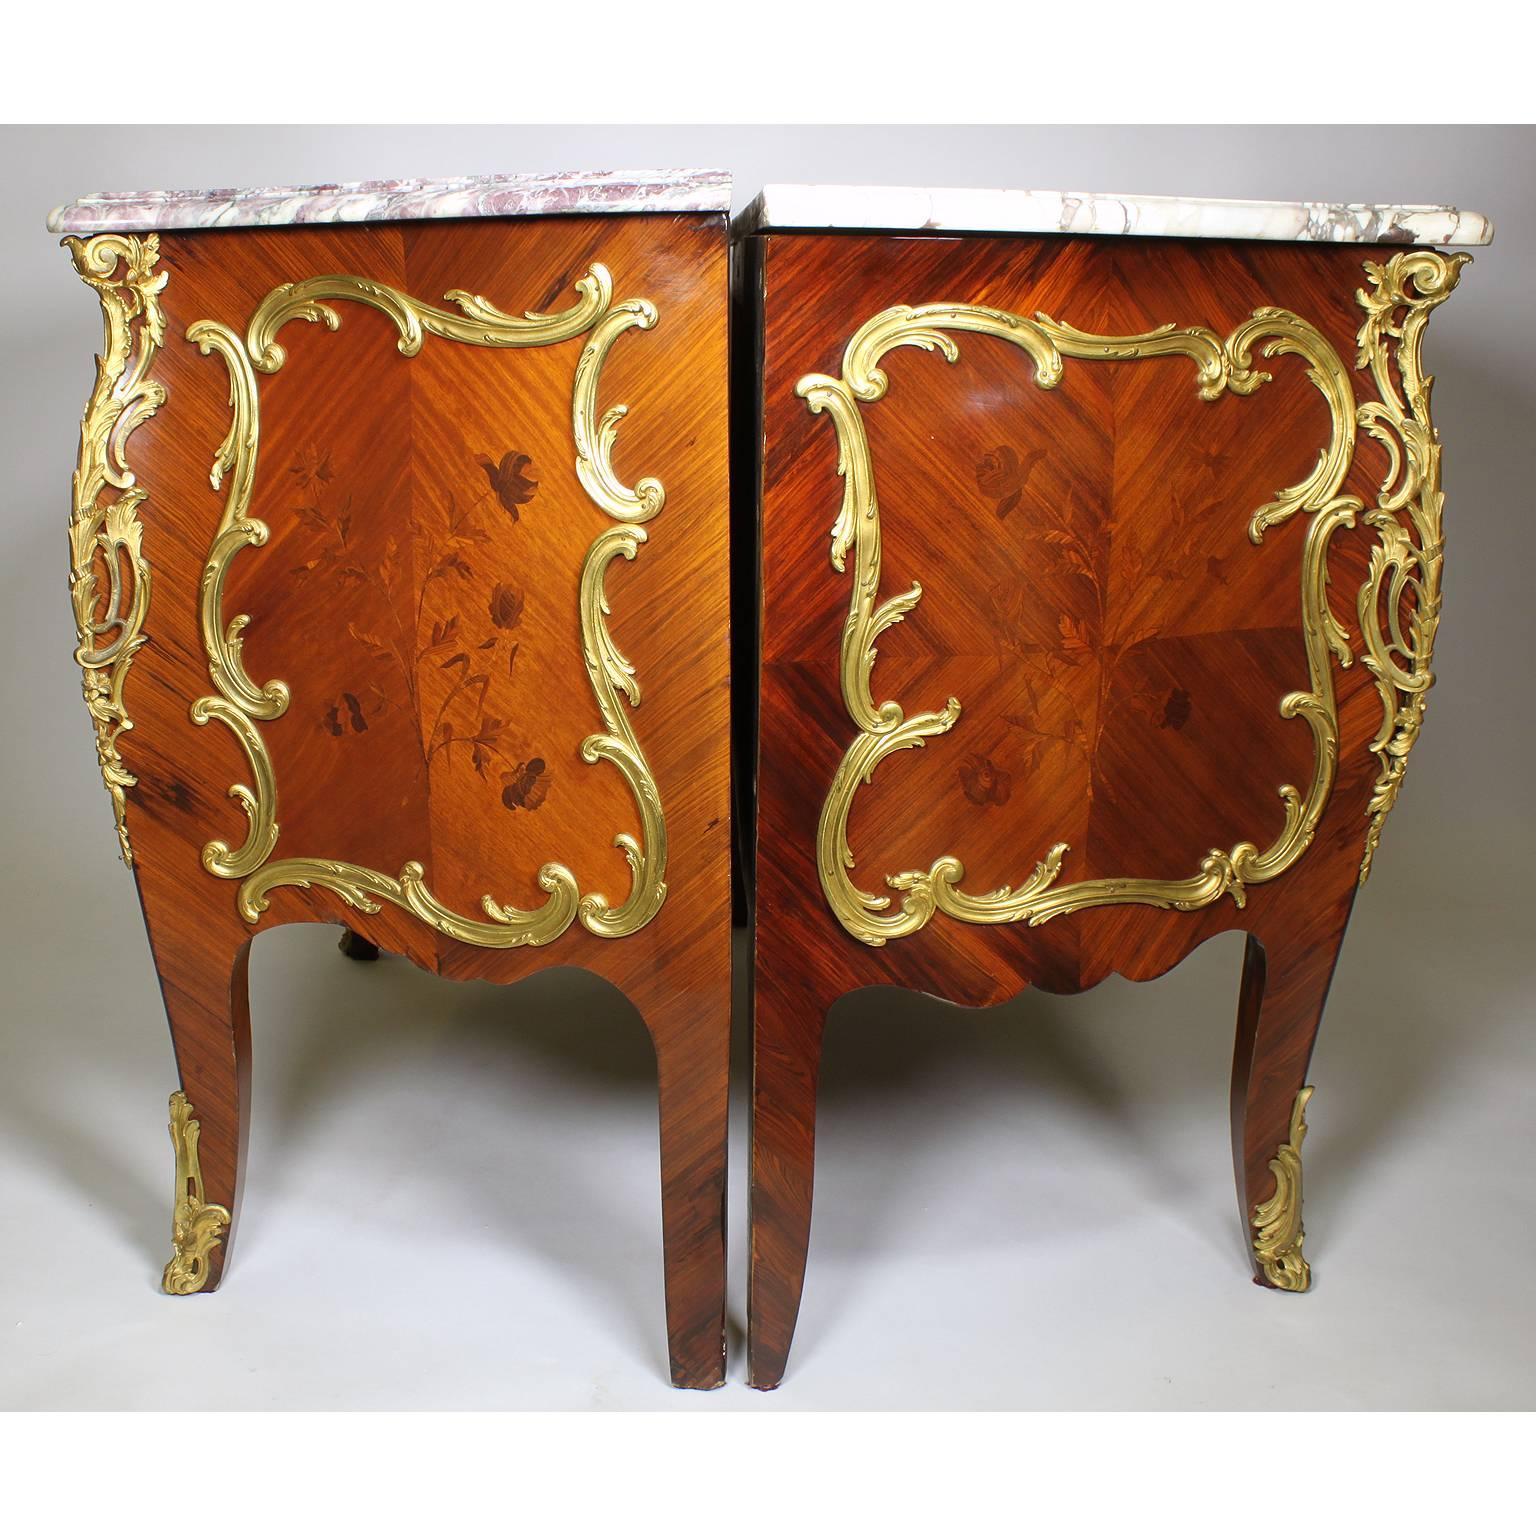 Semi-Pair of French 19th Century Louis XV Style Marquetry & Gilt-Bronze Commodes 4